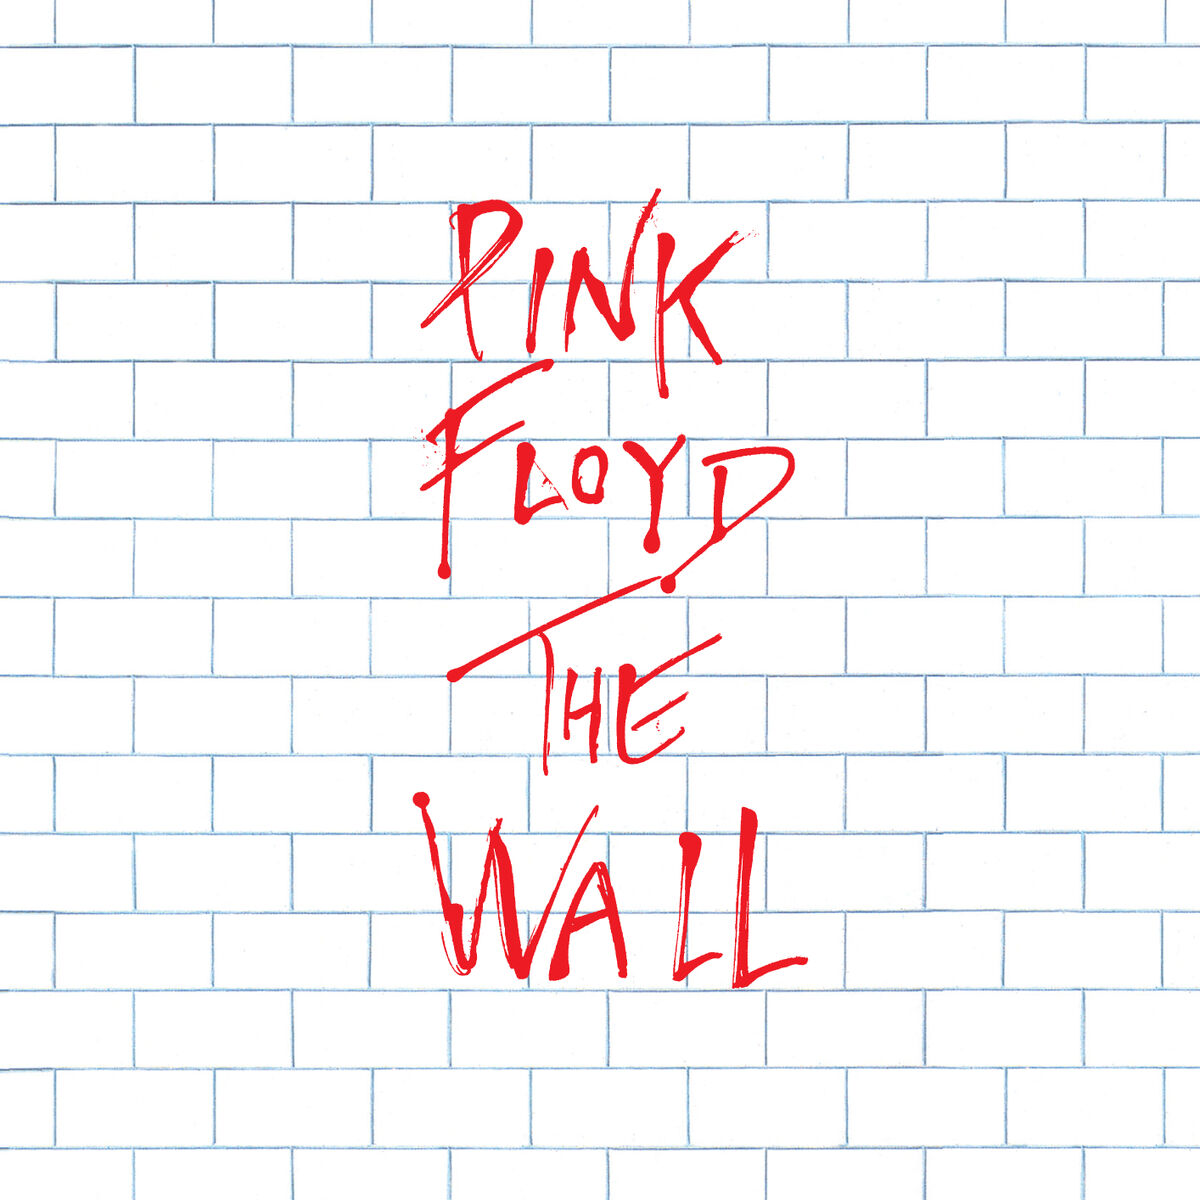 Another Brick in the Wall - Wikipedia